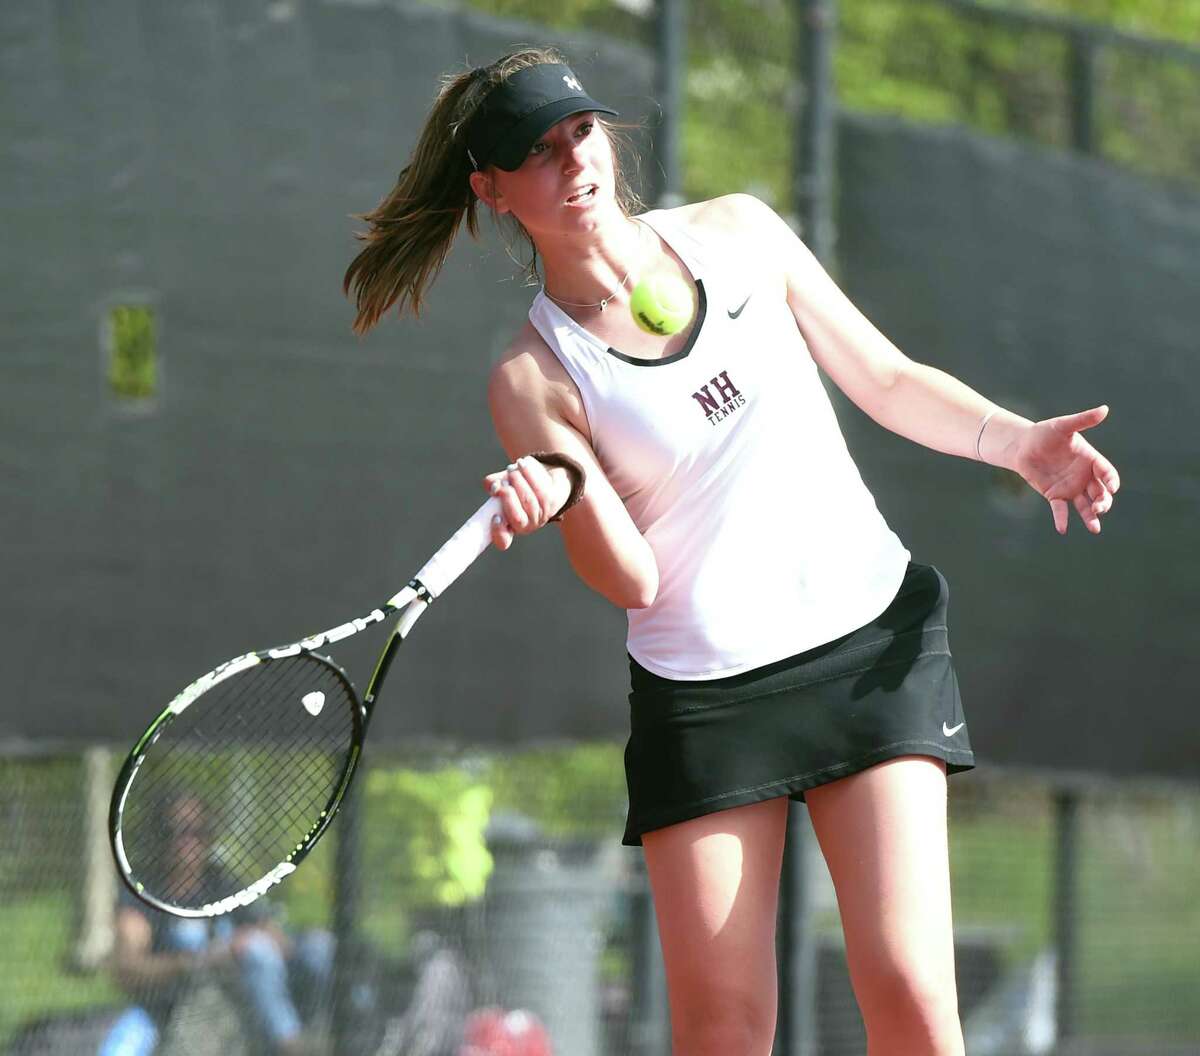 North Haven’s Julia Migliorini hits a forehand against Hand’s Sam Riordan on May 6.